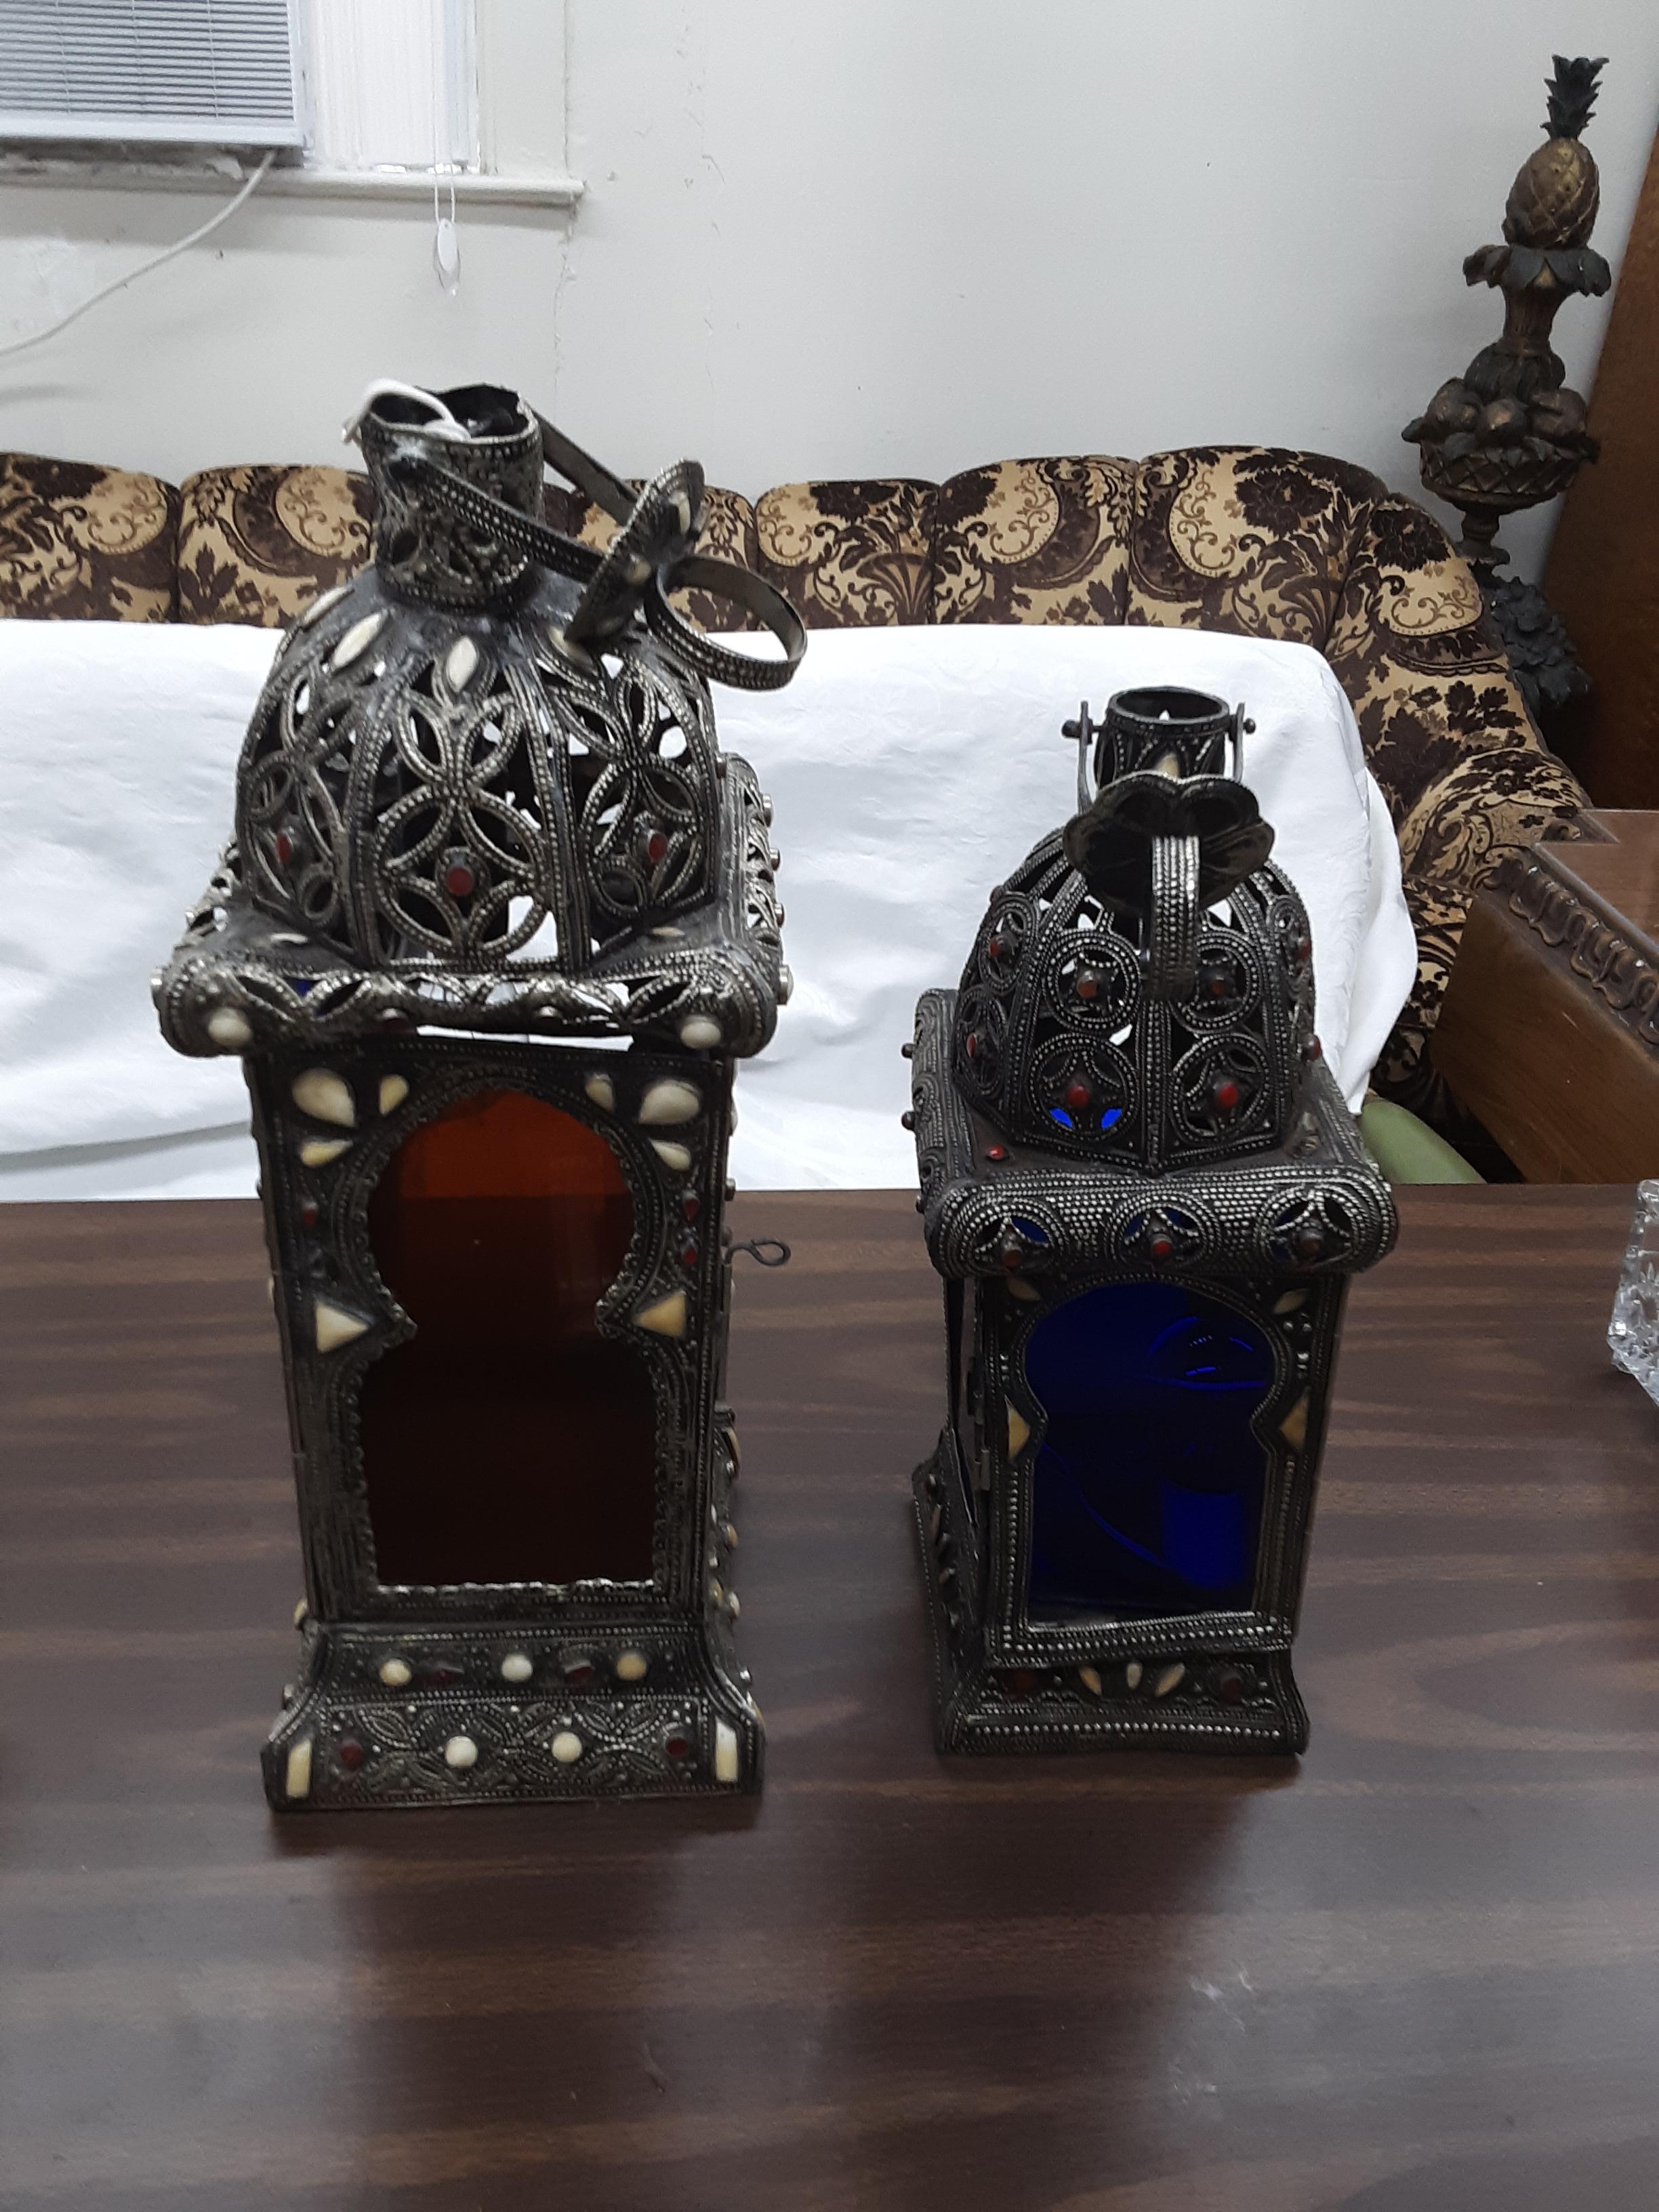 This is an antique vintage Moroccan art glass lamp set, of impeccable craftsmanship, the way it used to be made. This is a true collectors piece. Wired for electric.